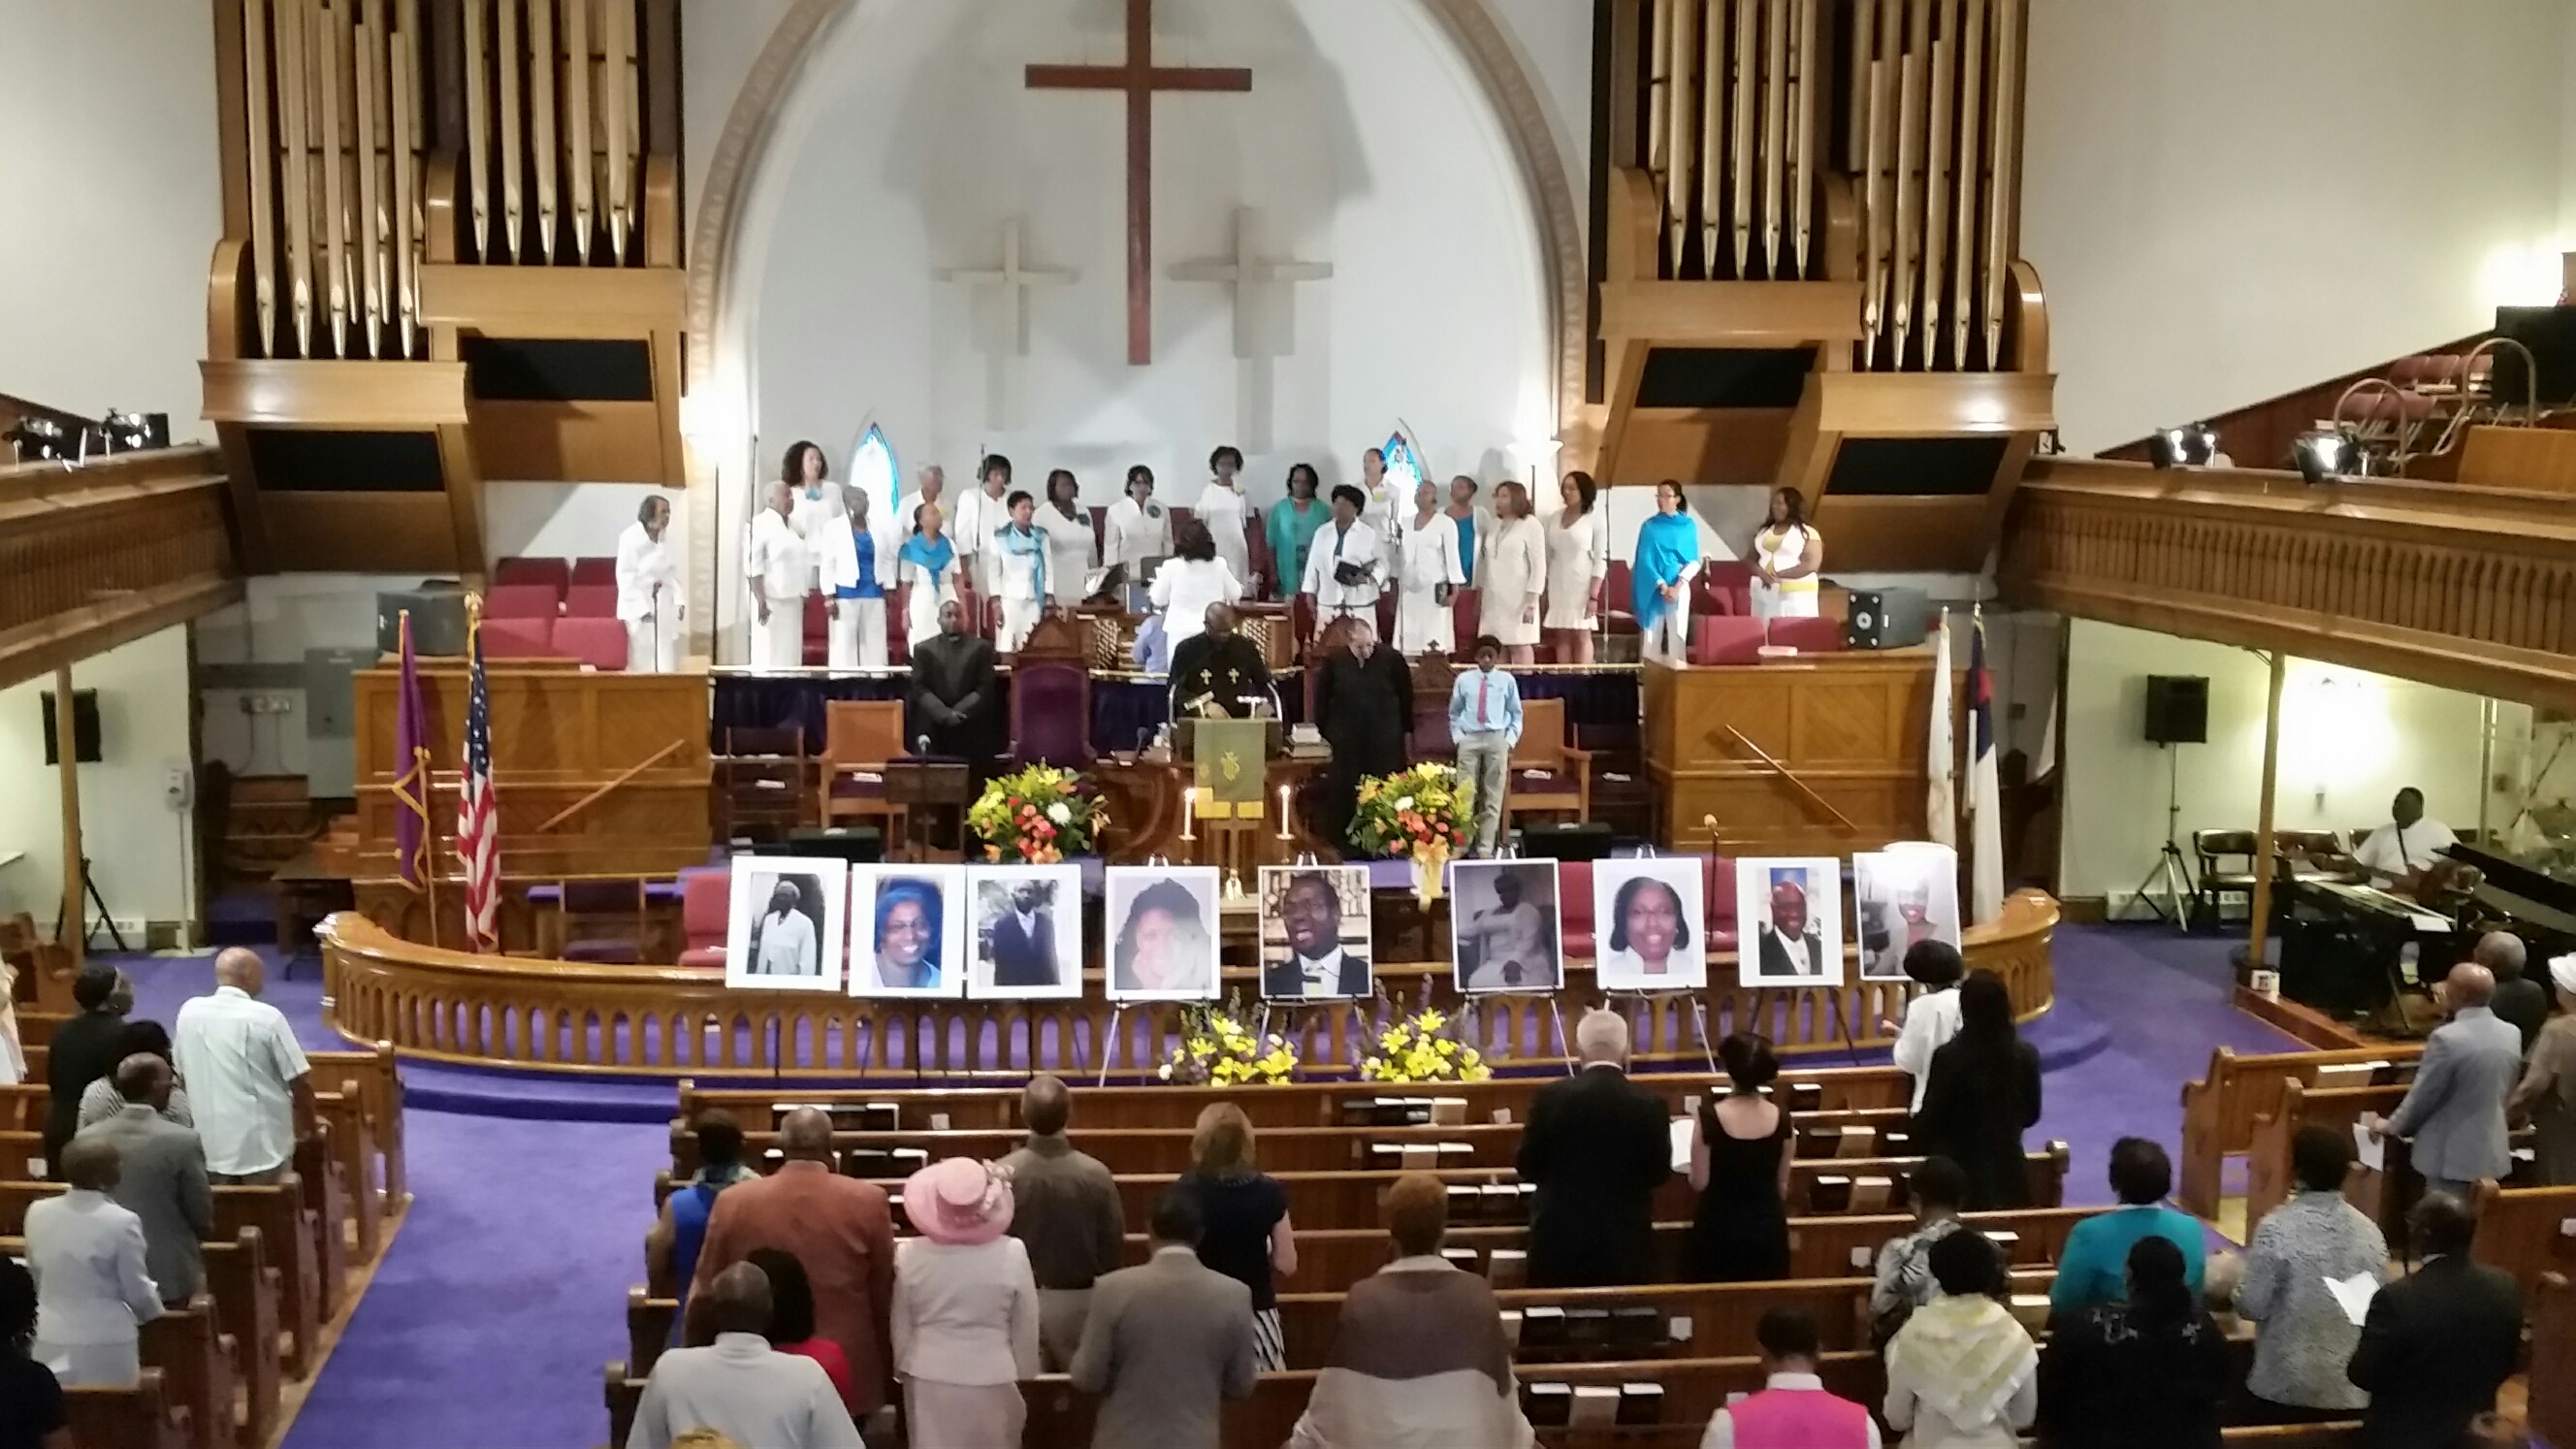 Local church services honor victims in Charleston shootings